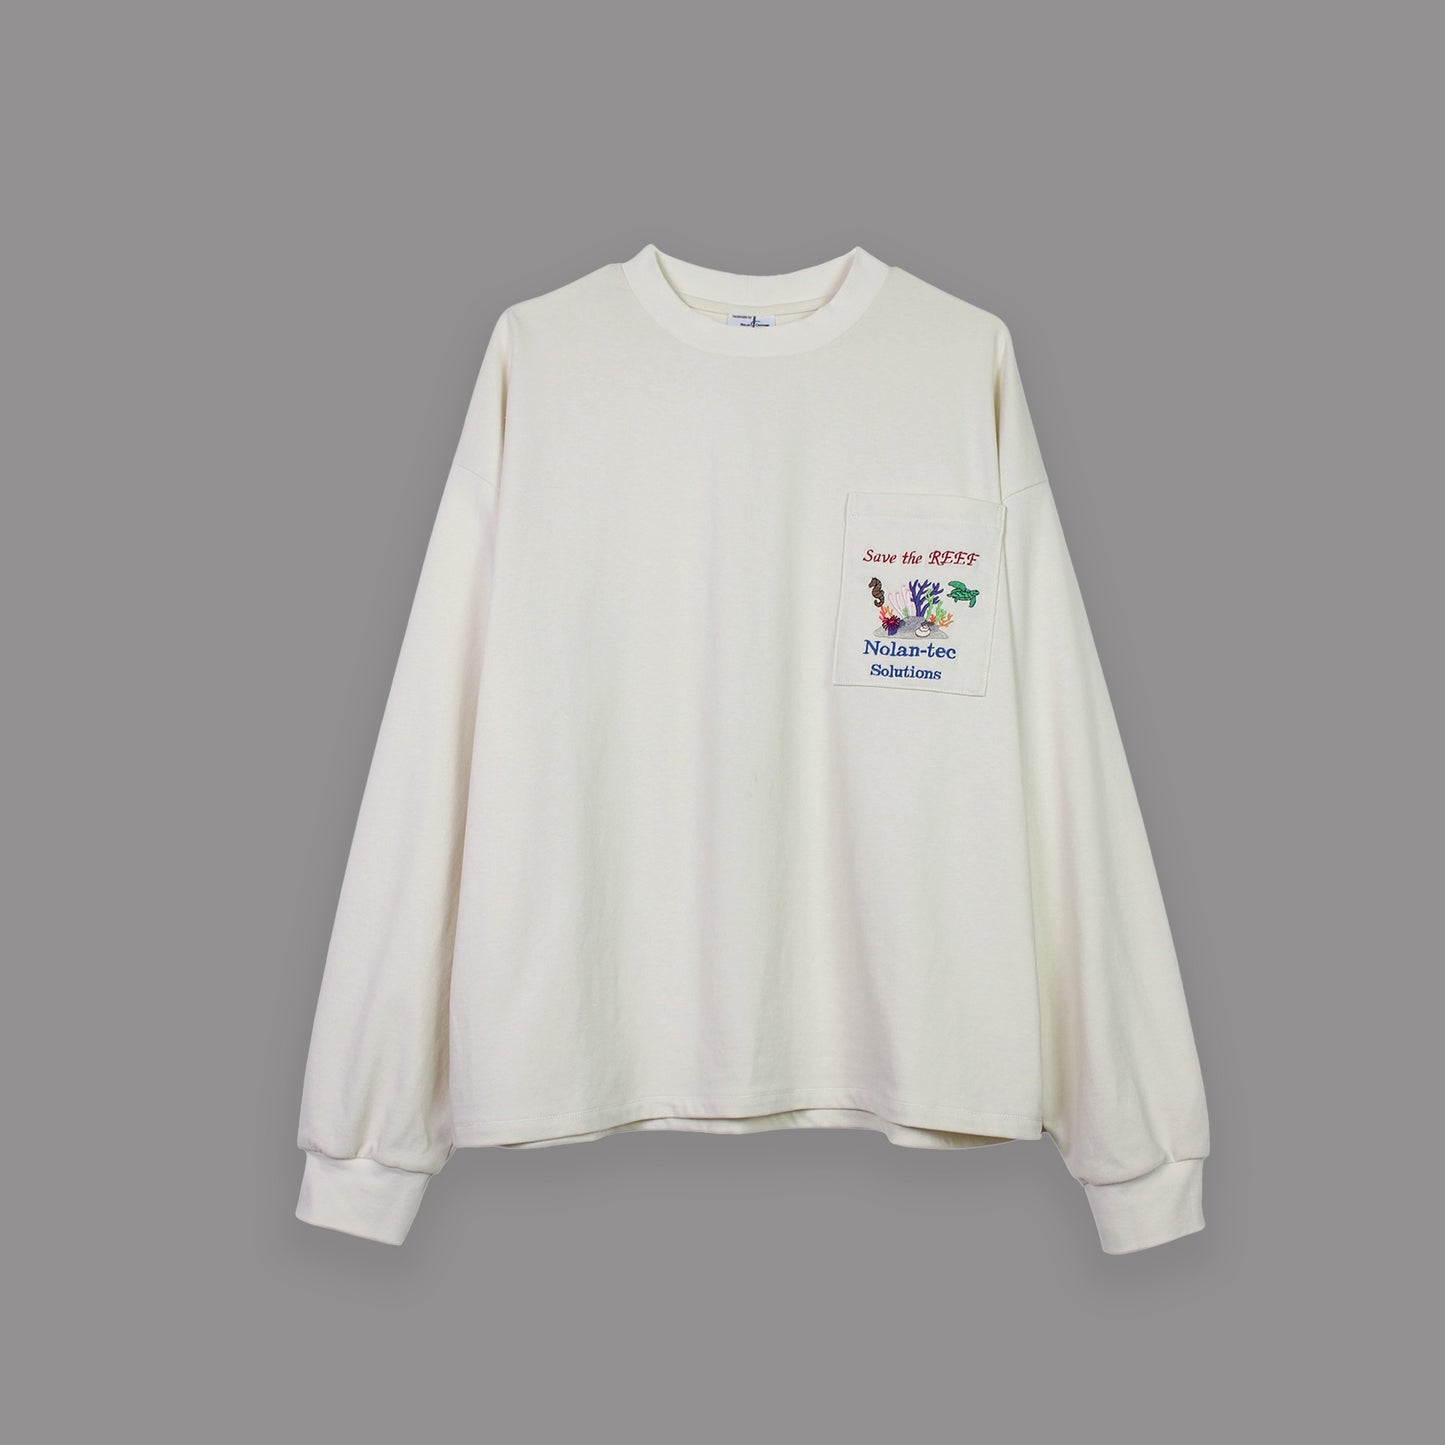 Save the Reef LS Shirt